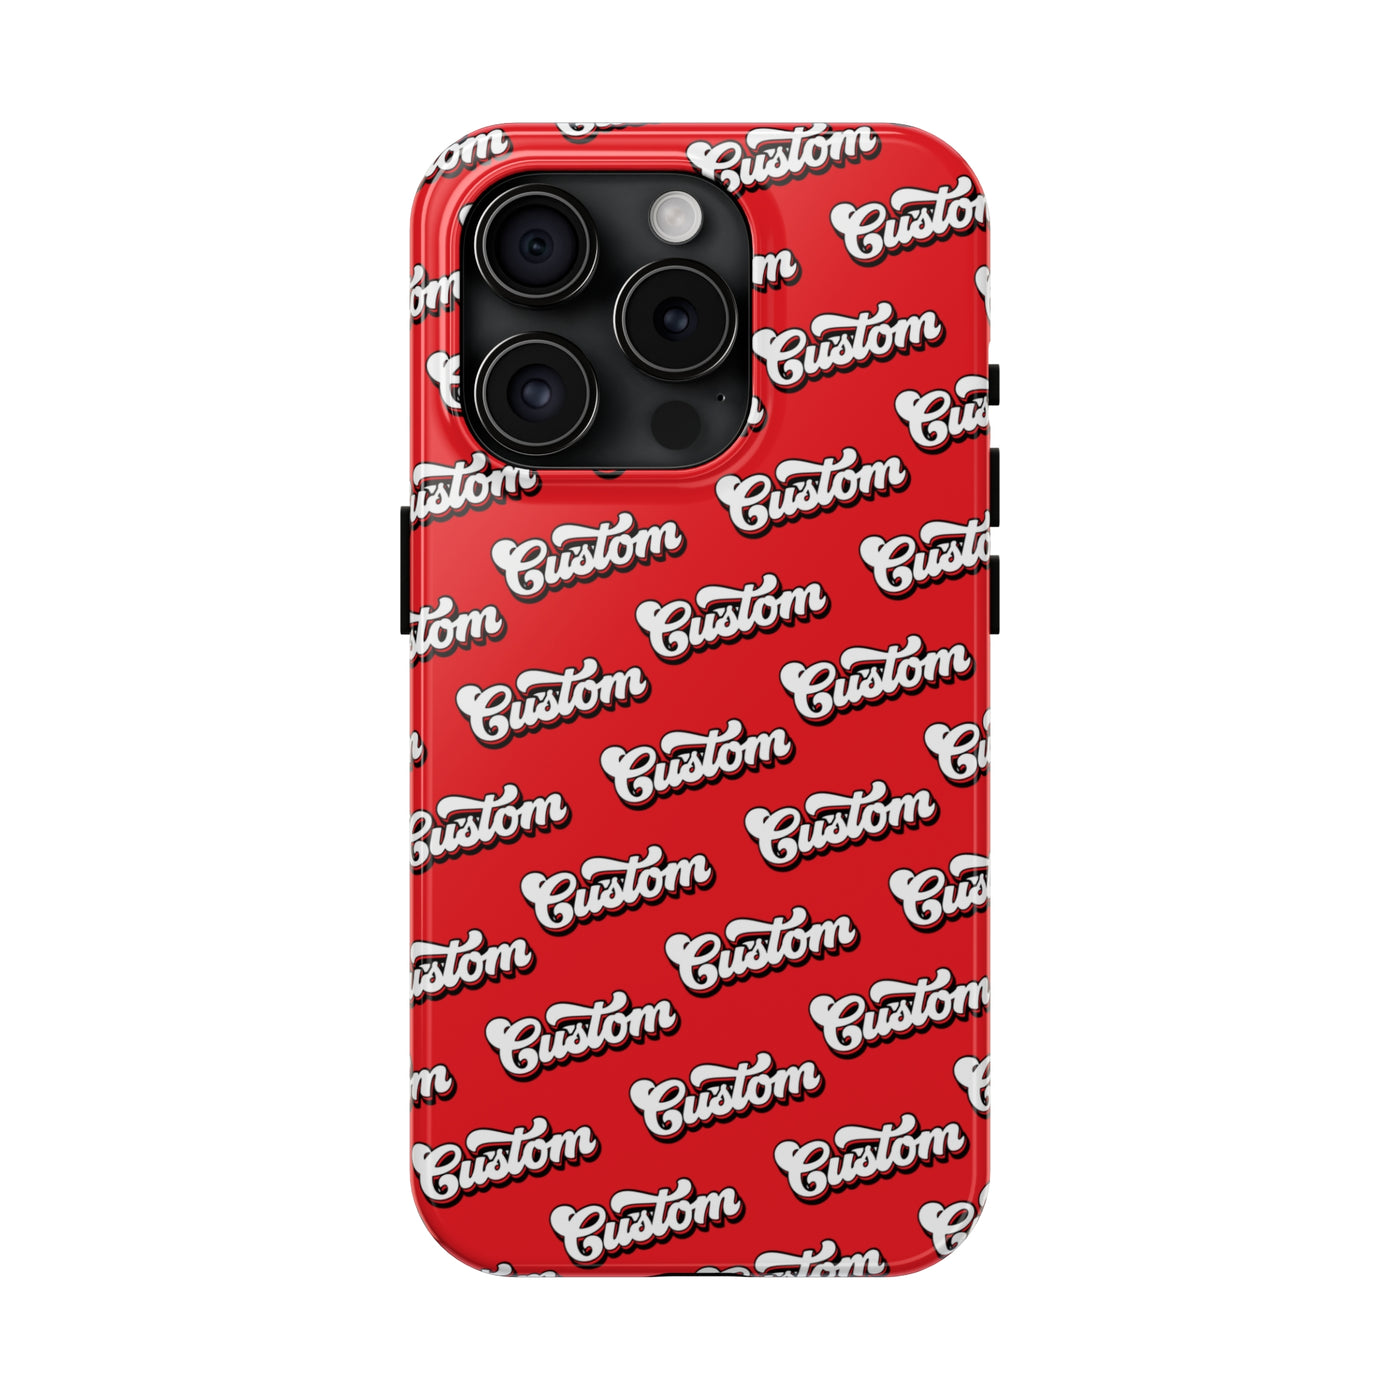 Copy of Trendy Bow Phone Case, Bed Party Bow Iphone case, Bow Phone Case, College Case, Bow Gift - Maryland, Terps, Terrapins, UMD, Red Gold & Black